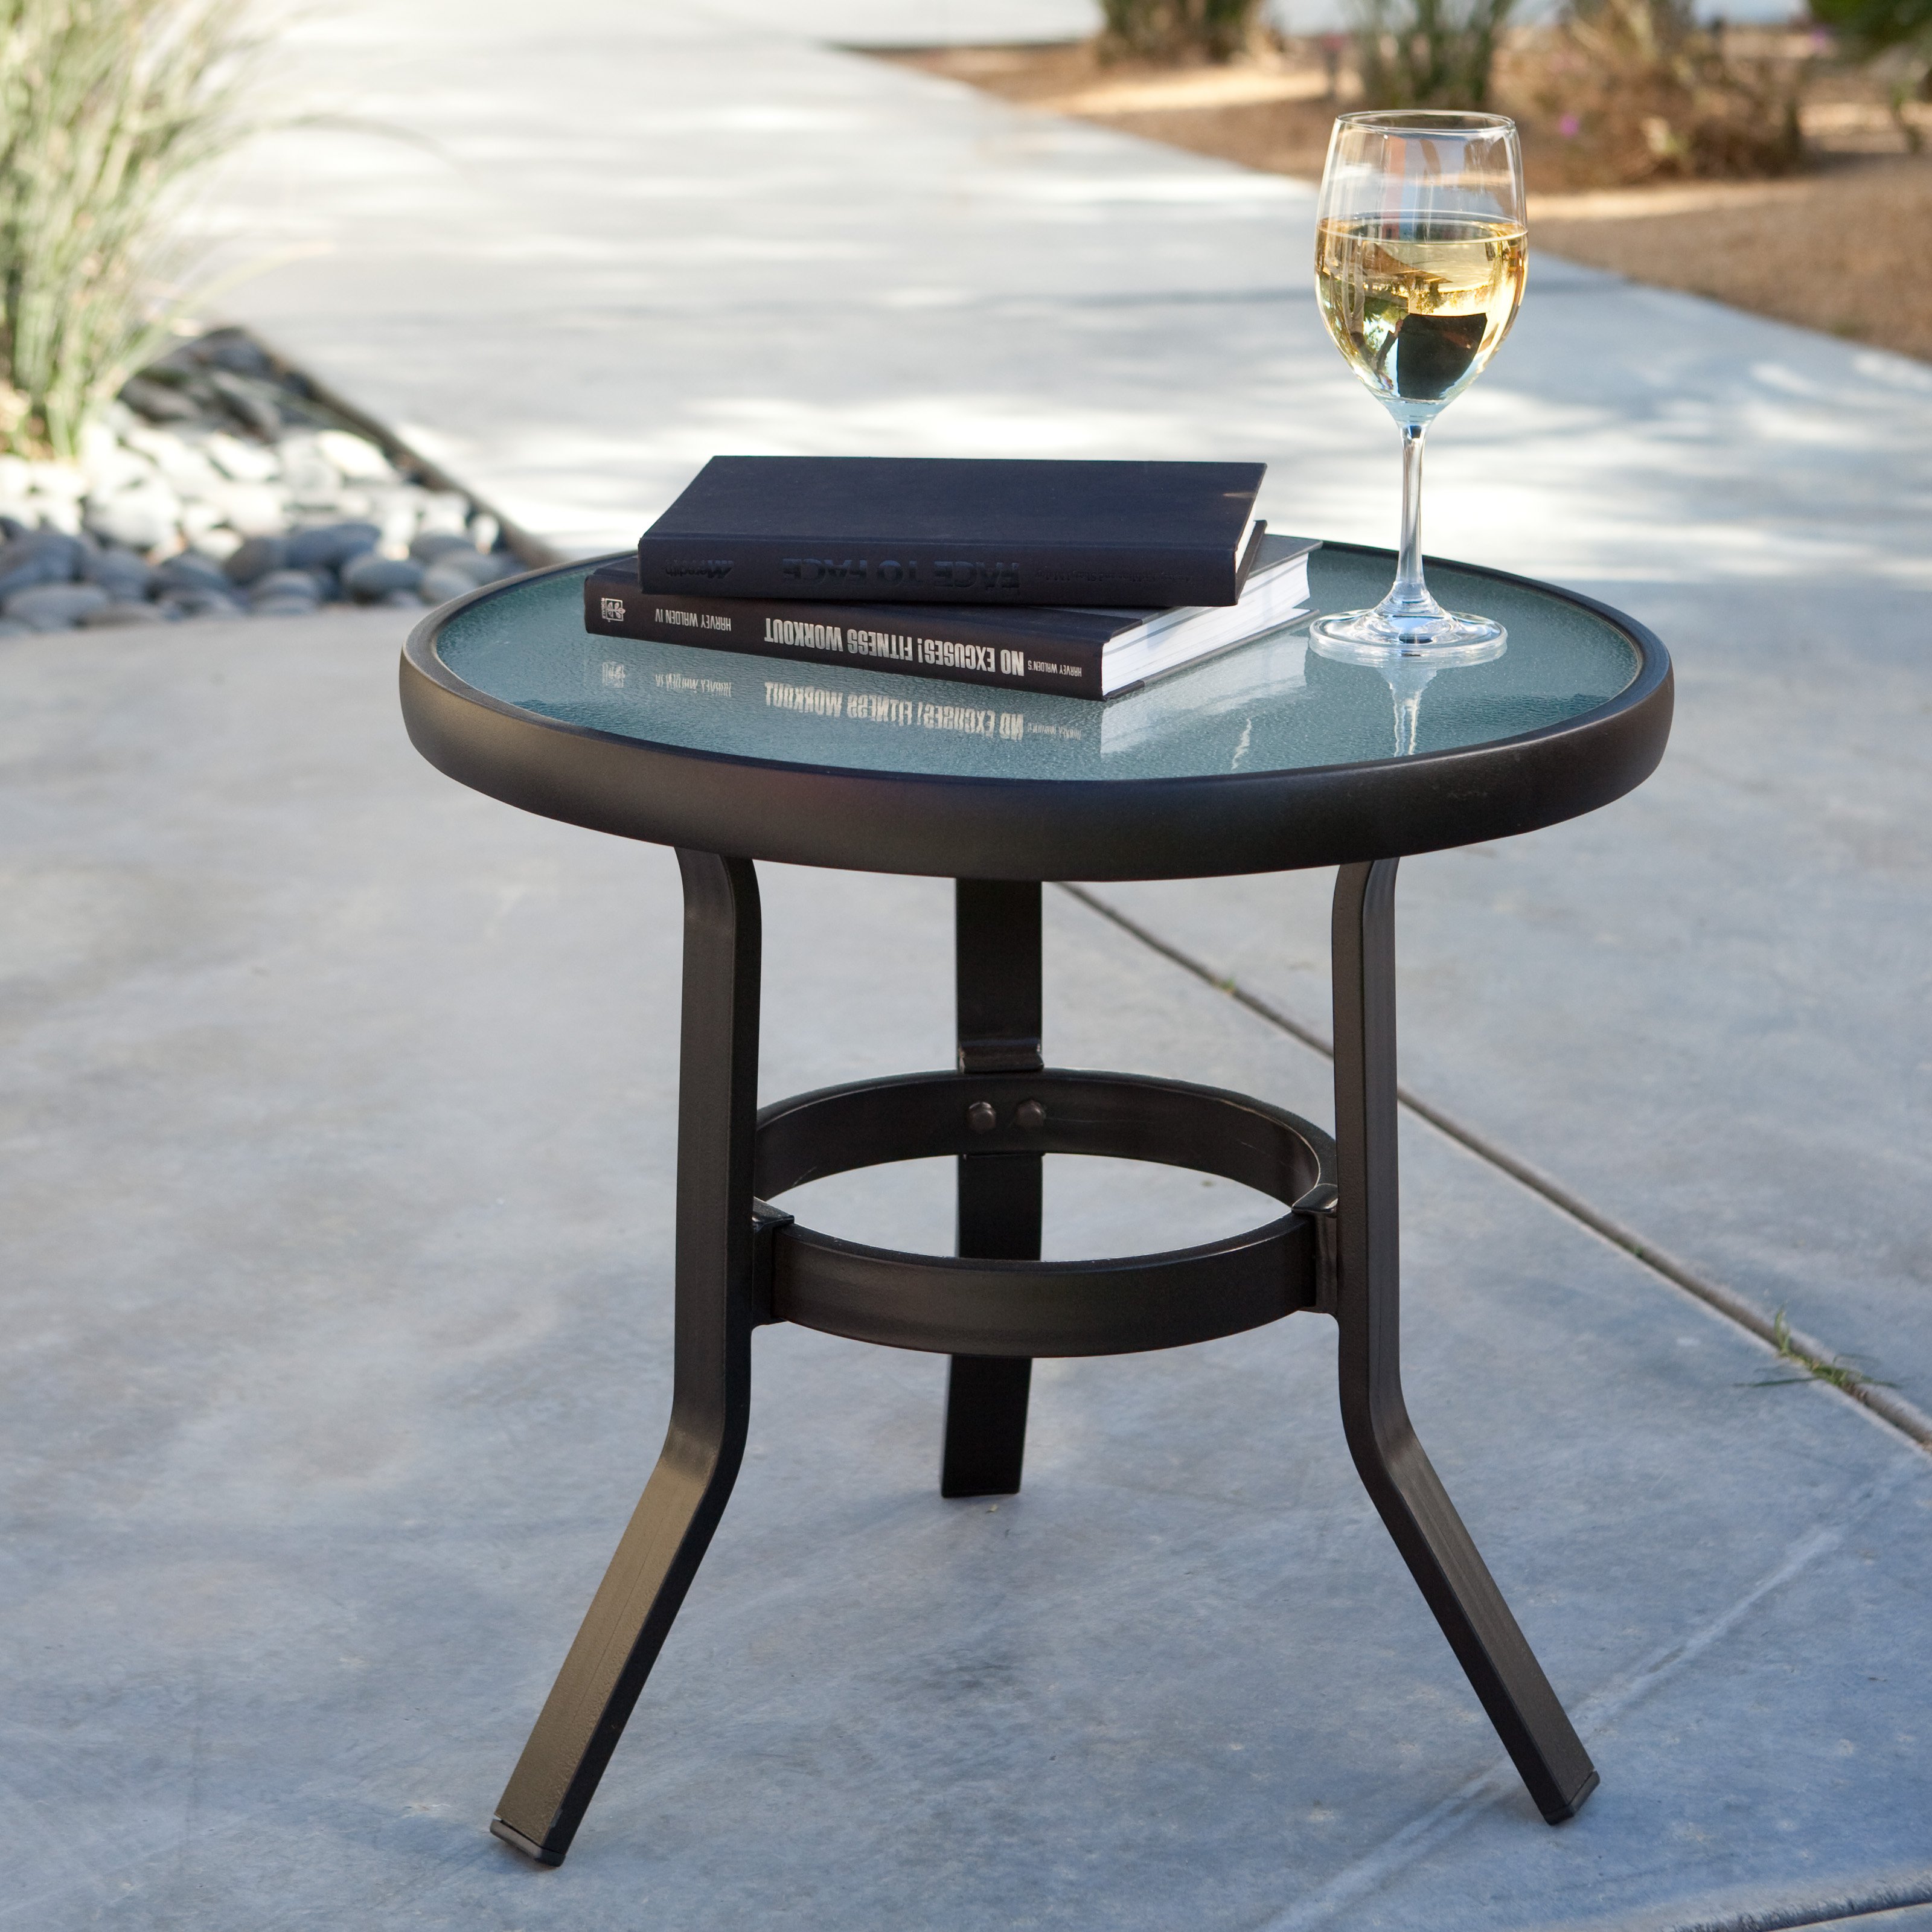 good looking glass top side table round outdoor chairs bumpers and lamps depot john home dining small argos designs mainstays set protector base lamp rectangle agreeable lewis